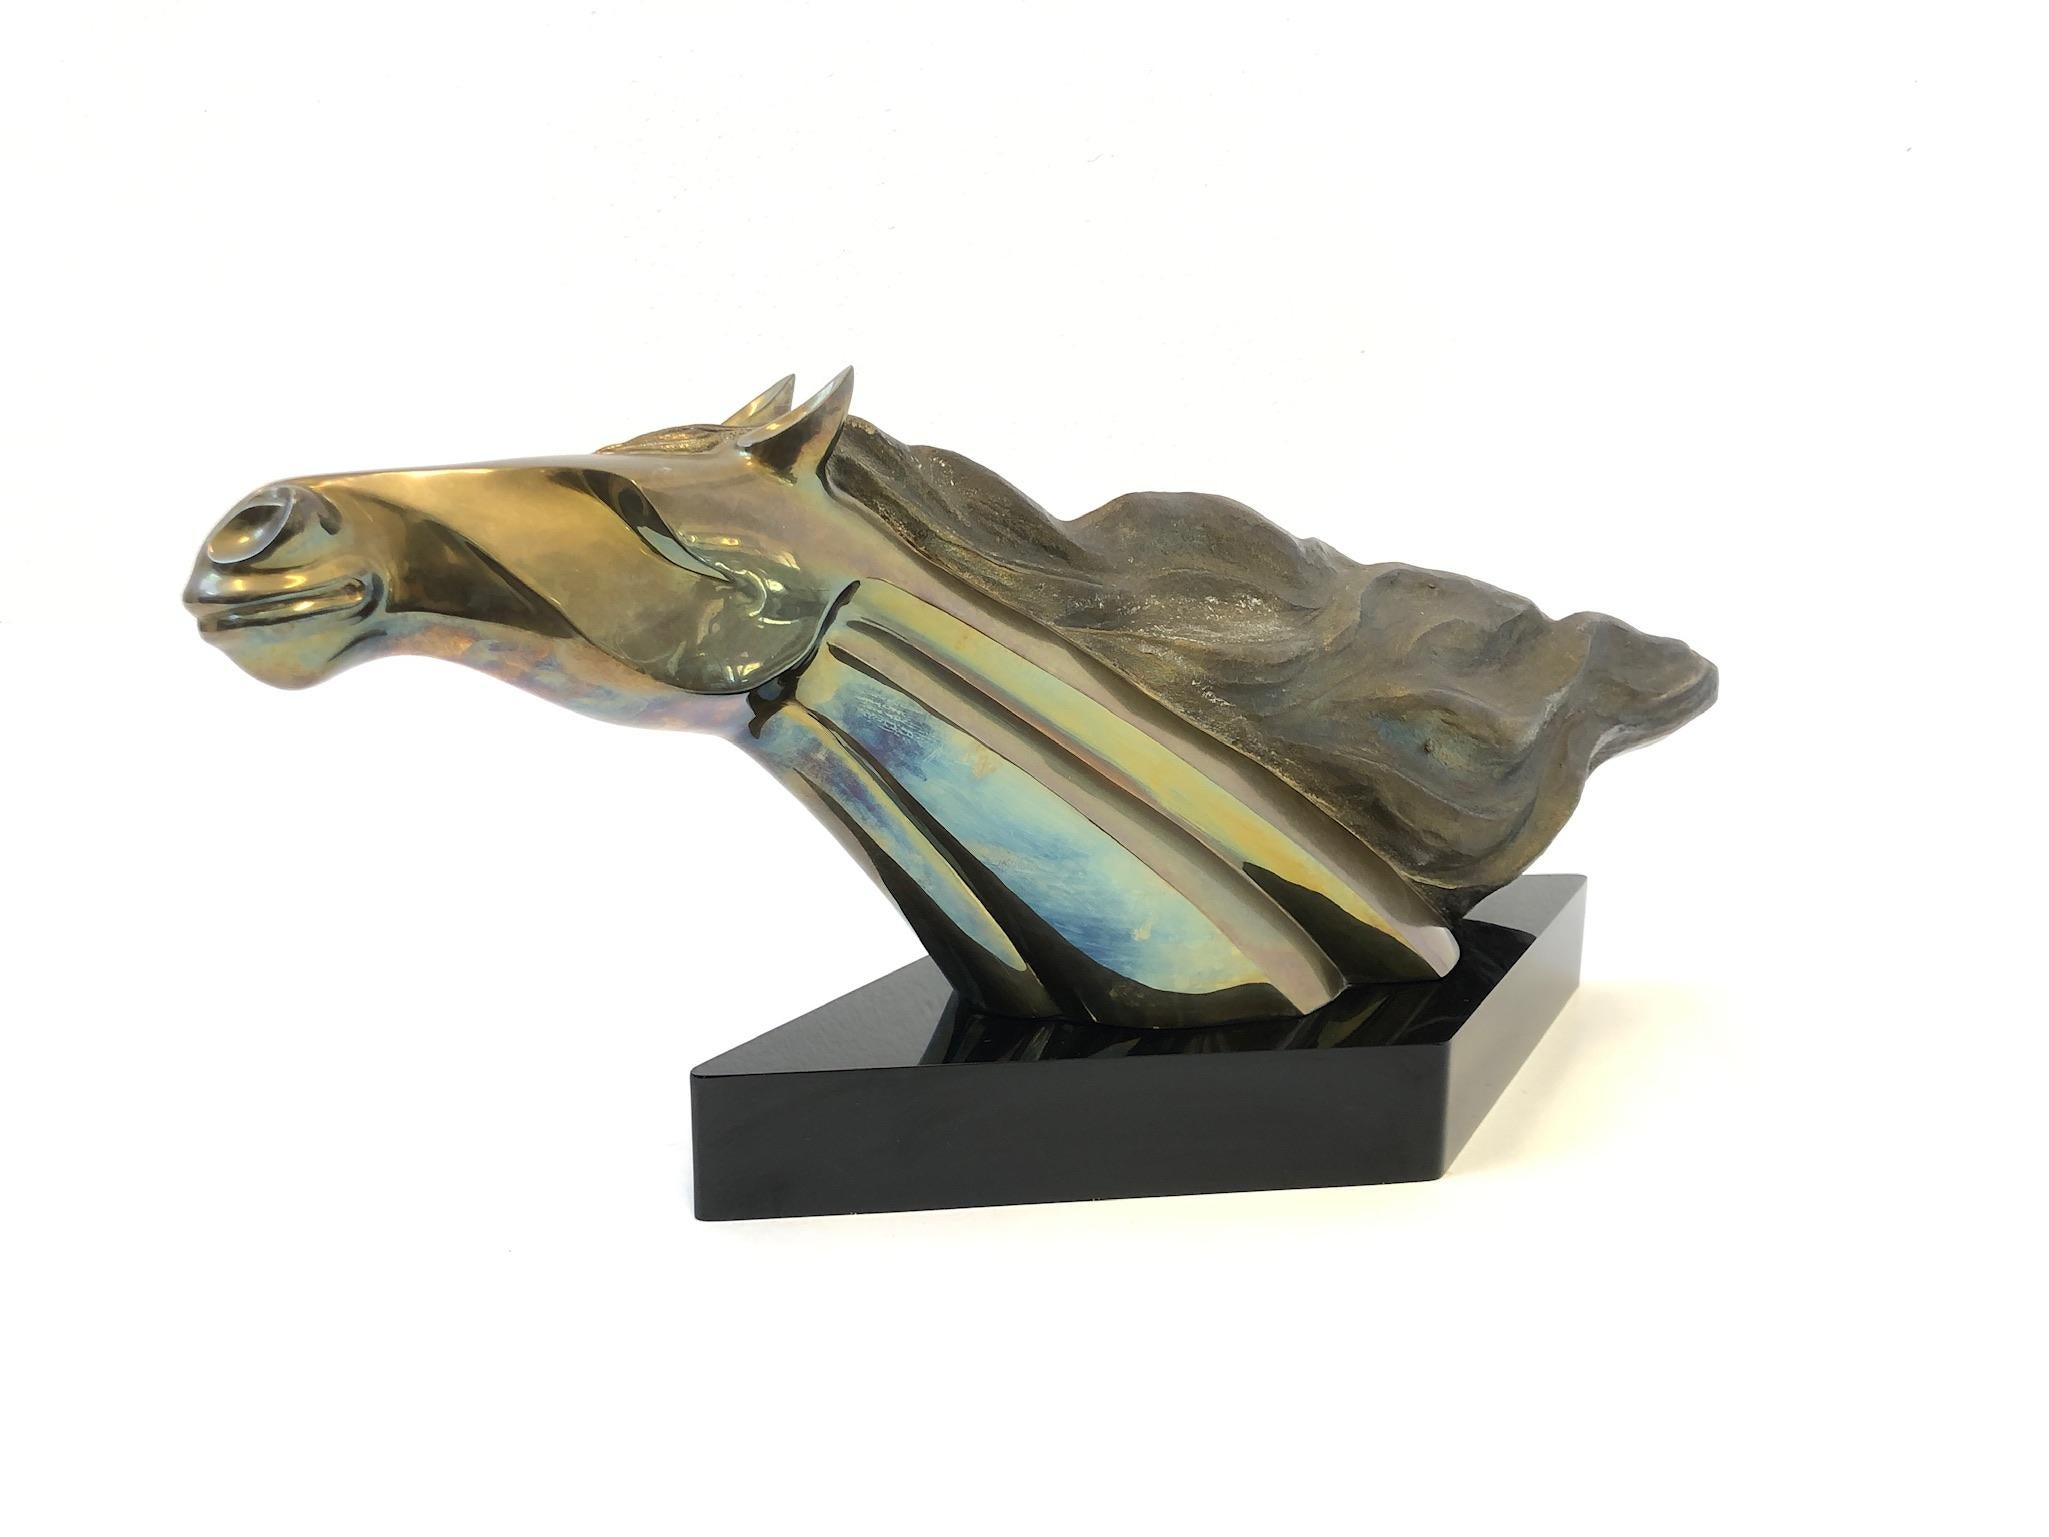 A beautiful cast bronze horse head sculpture by Italian Sculptor Maxime Delo from the 1980s. The sculpture is constructed of cast bronze and sits on a black acrylic base. Signed M. Delo and numbered 13/150.
Measurements: 32” wide, 10.5” deep and